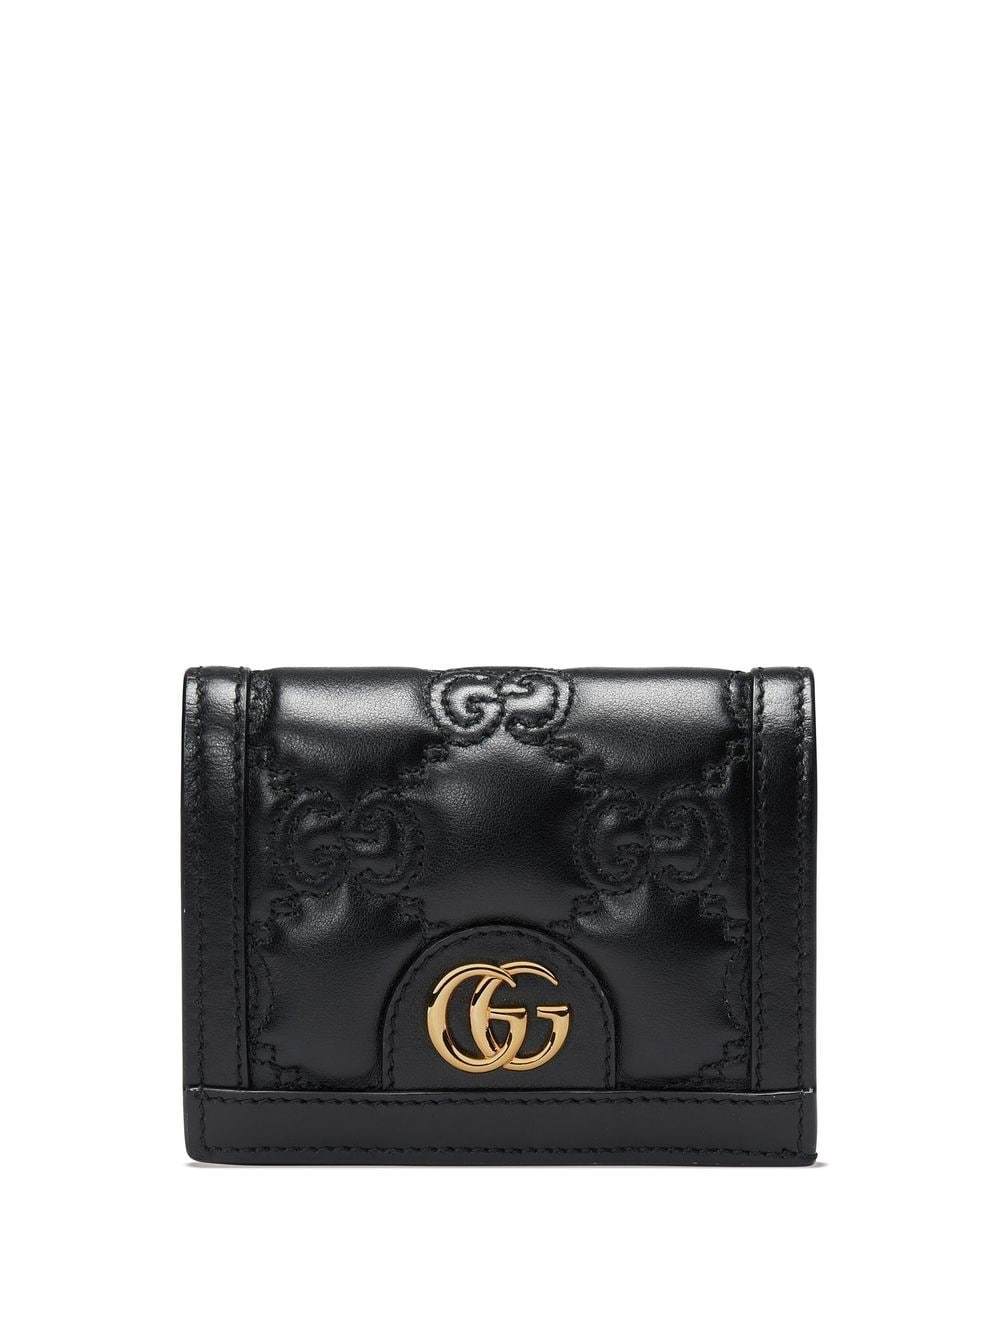 Gucci embossed-logo leather wallet - Black